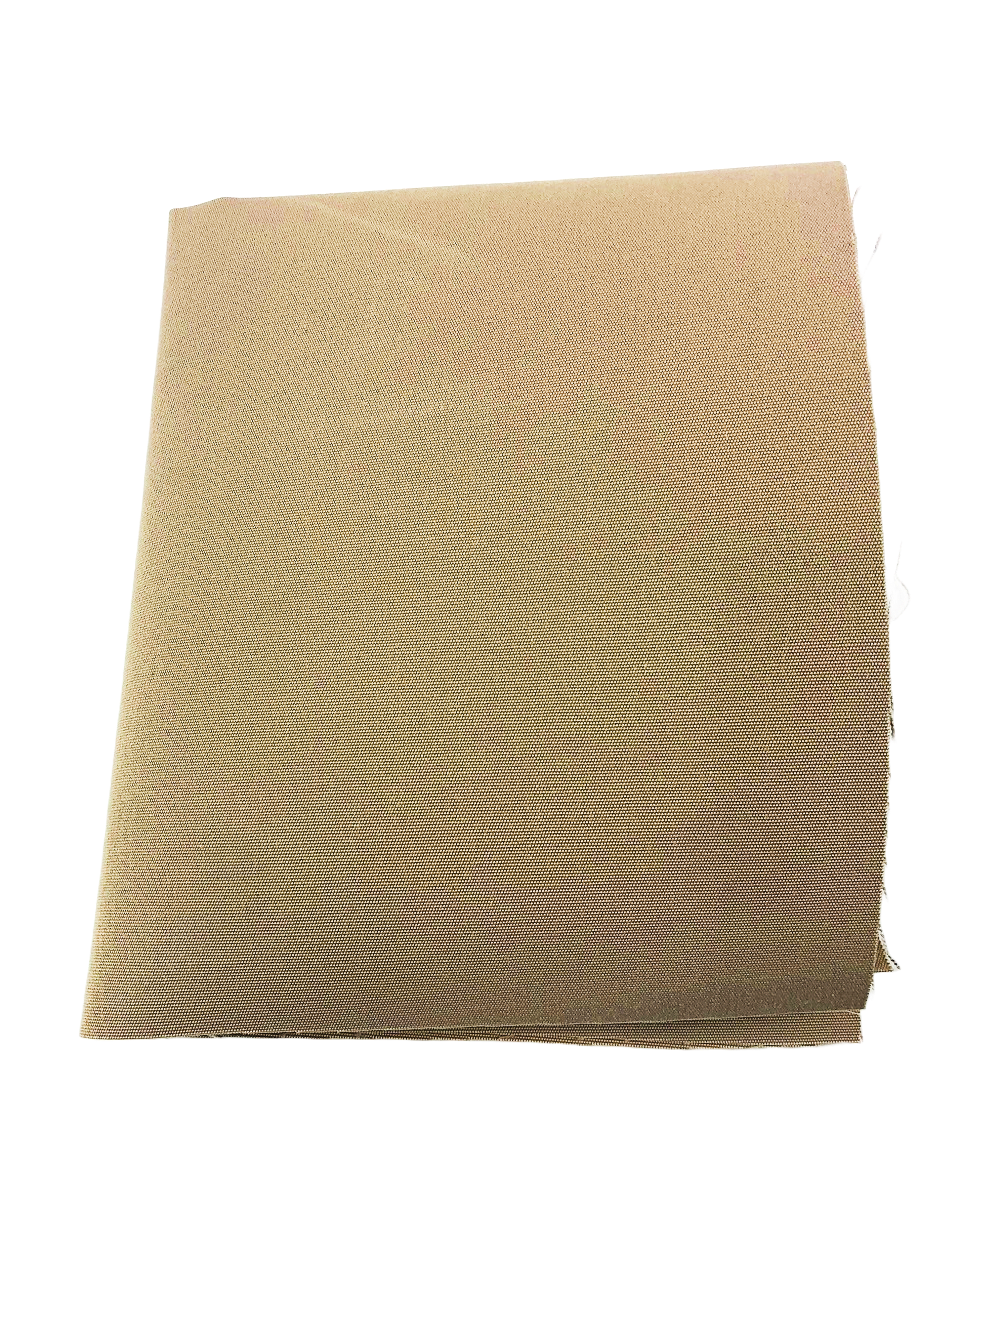 Buy a Beige Sunbrella Repair Kit for your Boat Cover / Bimini Top today online or at our storefront in Oak Creek, Wisconsin.